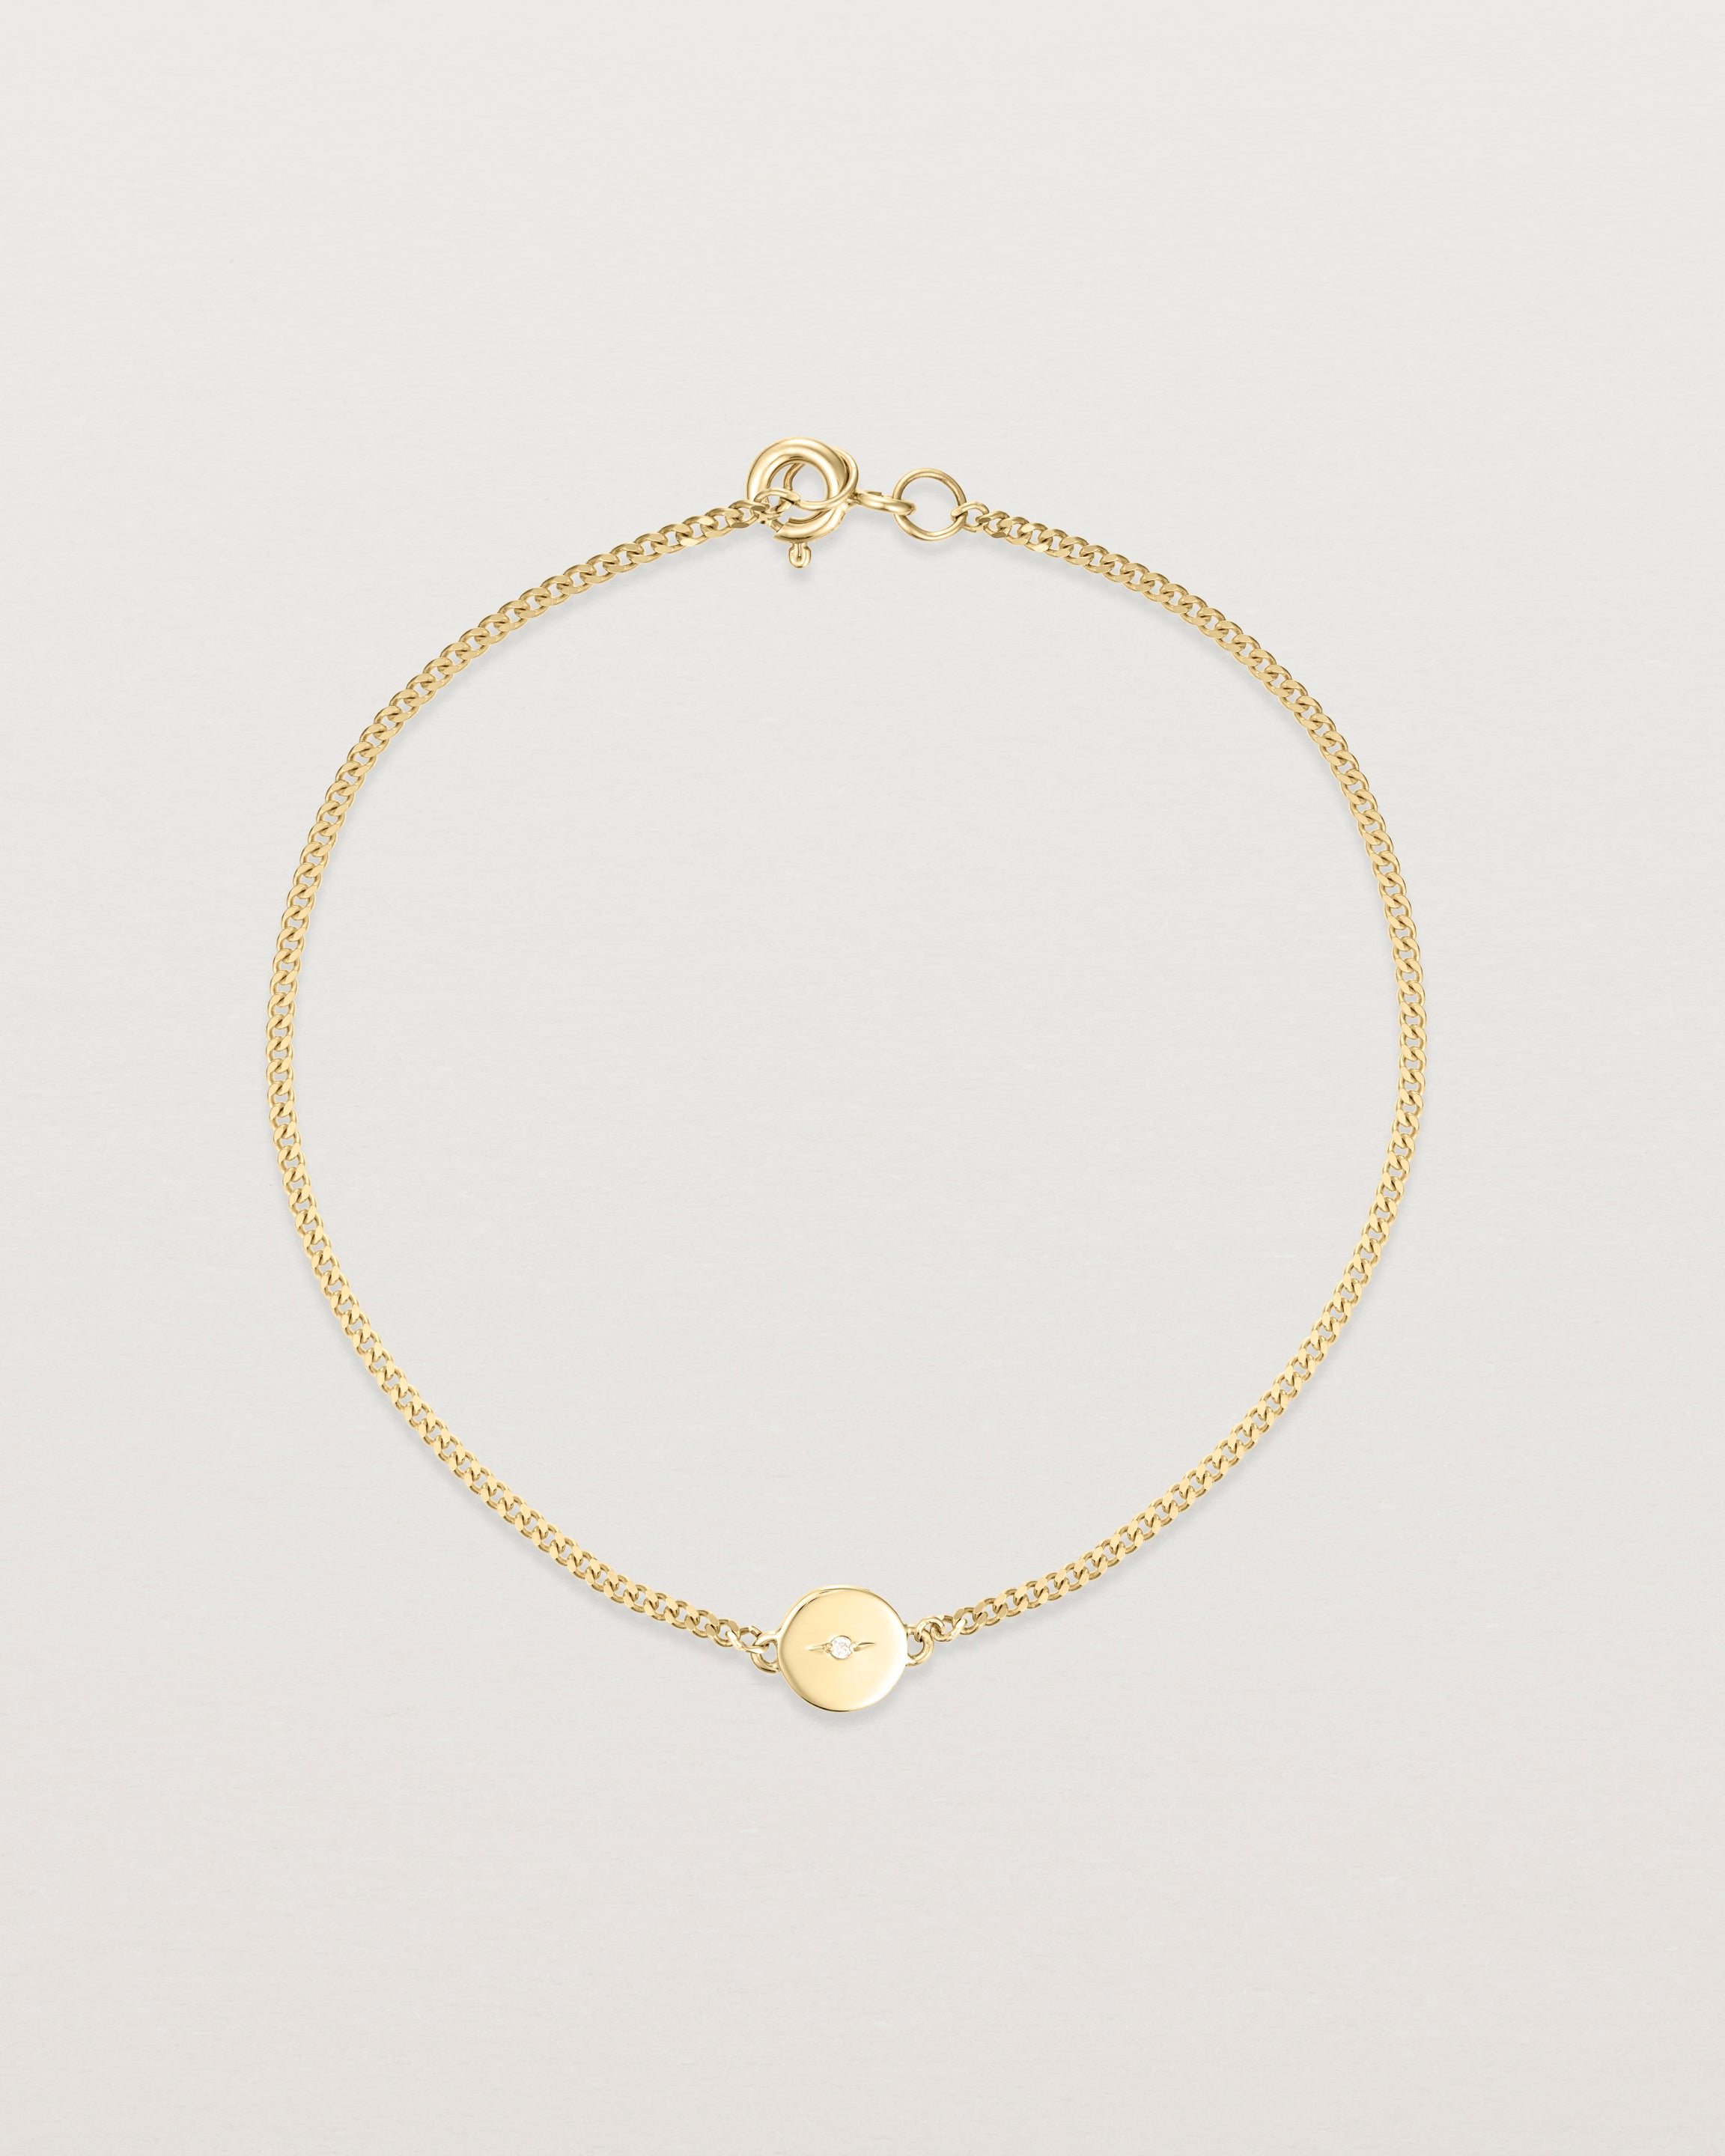 Top view of the Eily Bracelet | Birthstone in yellow gold.